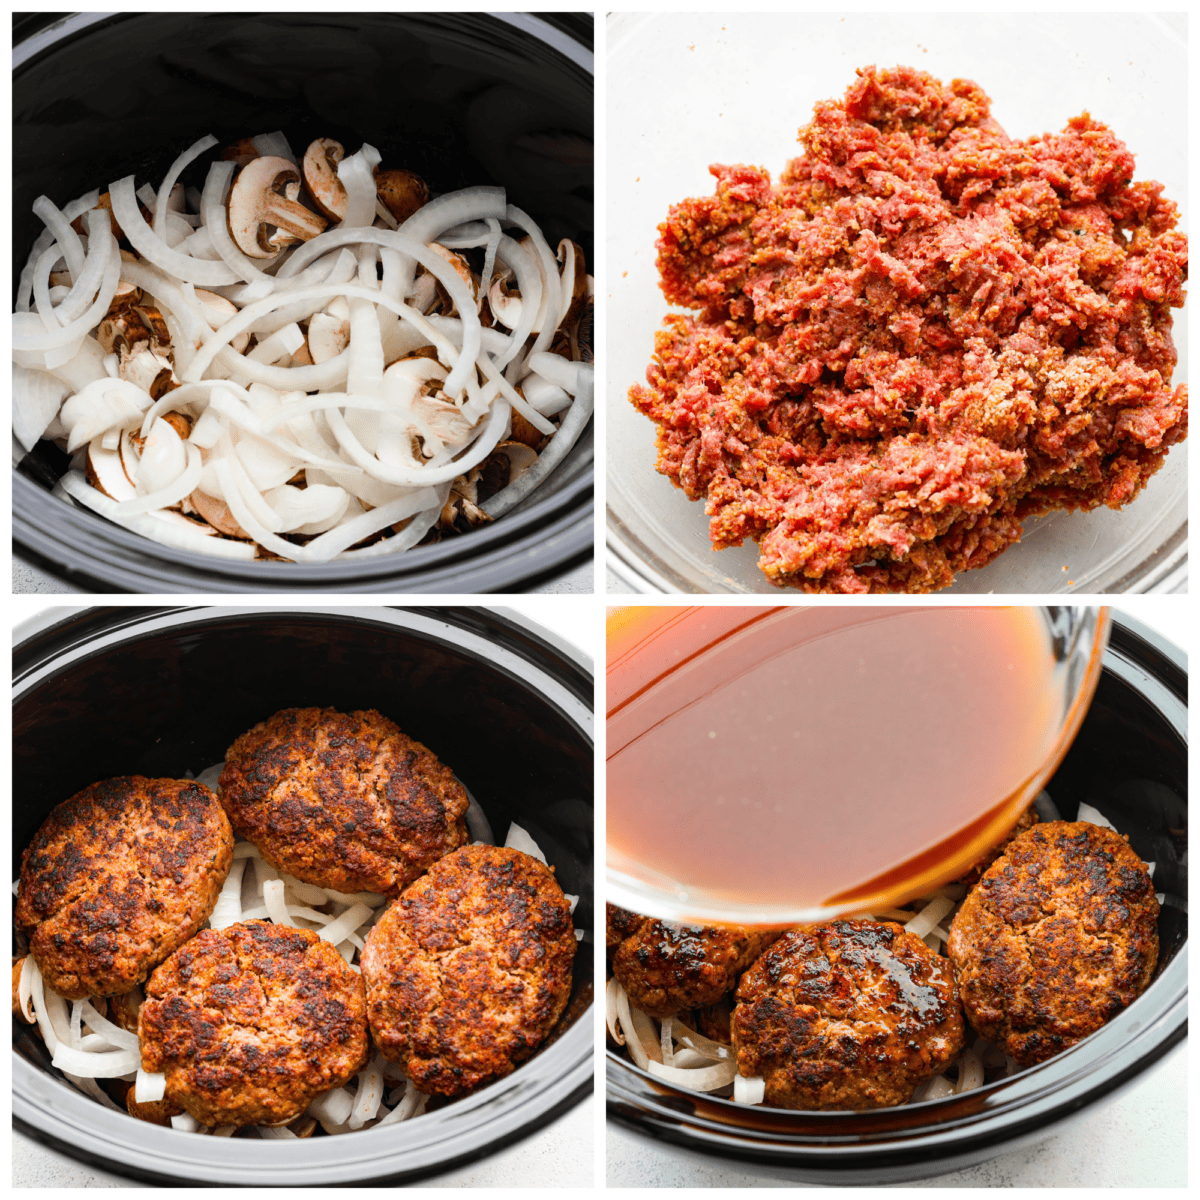 4-photo collage of the vegetables, beef patties, and gravy mixture being added to a Crockpot.